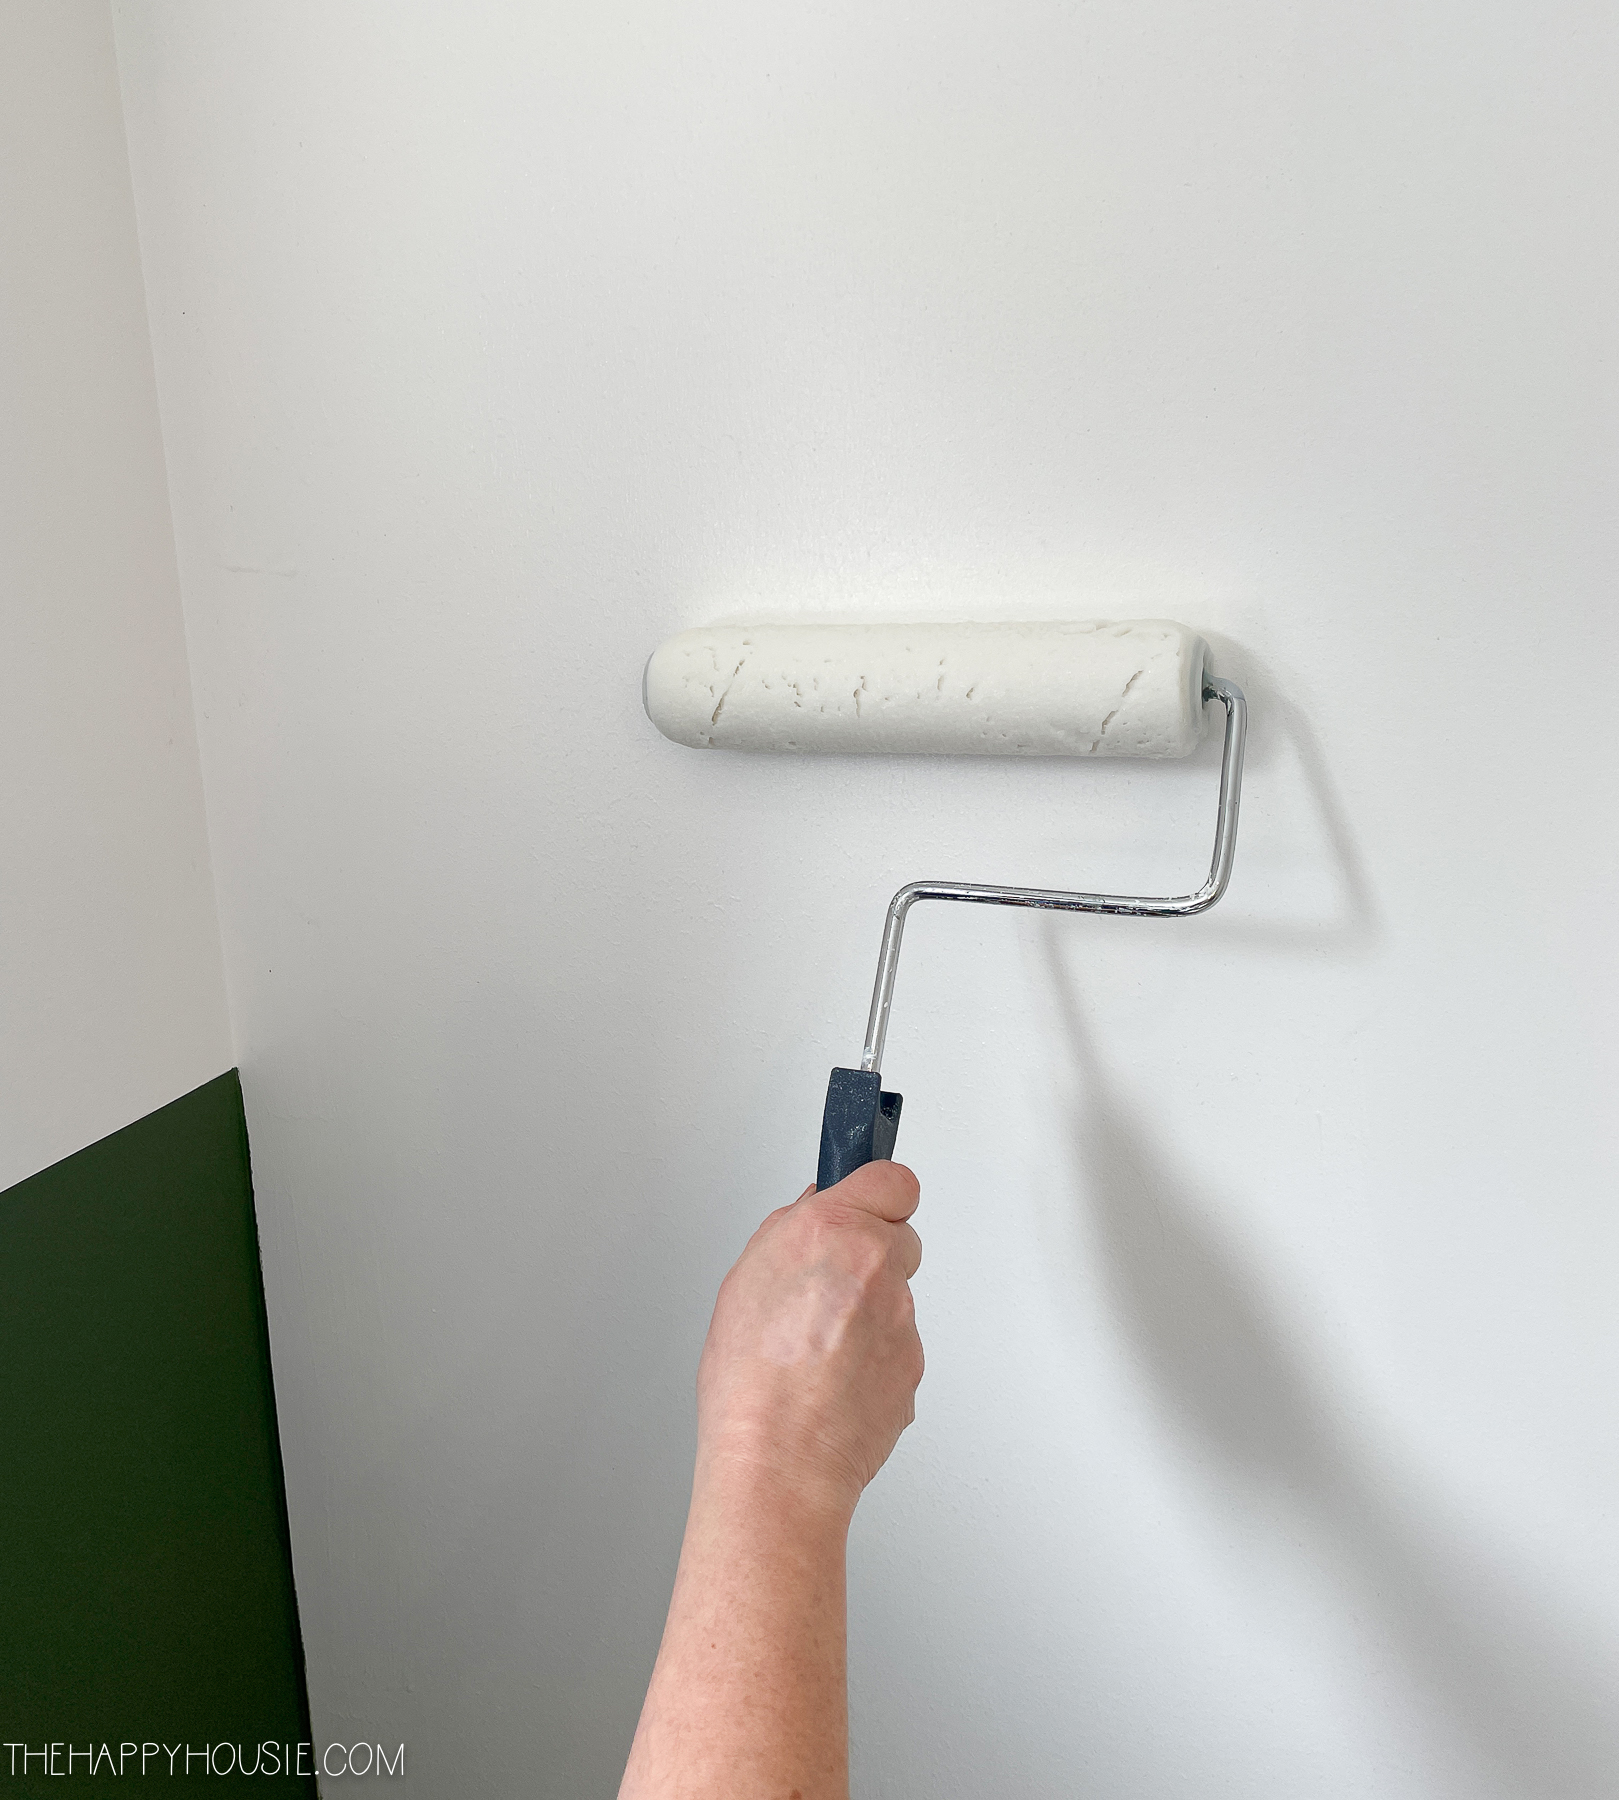 applying wallpaper paste to the wall using a roller